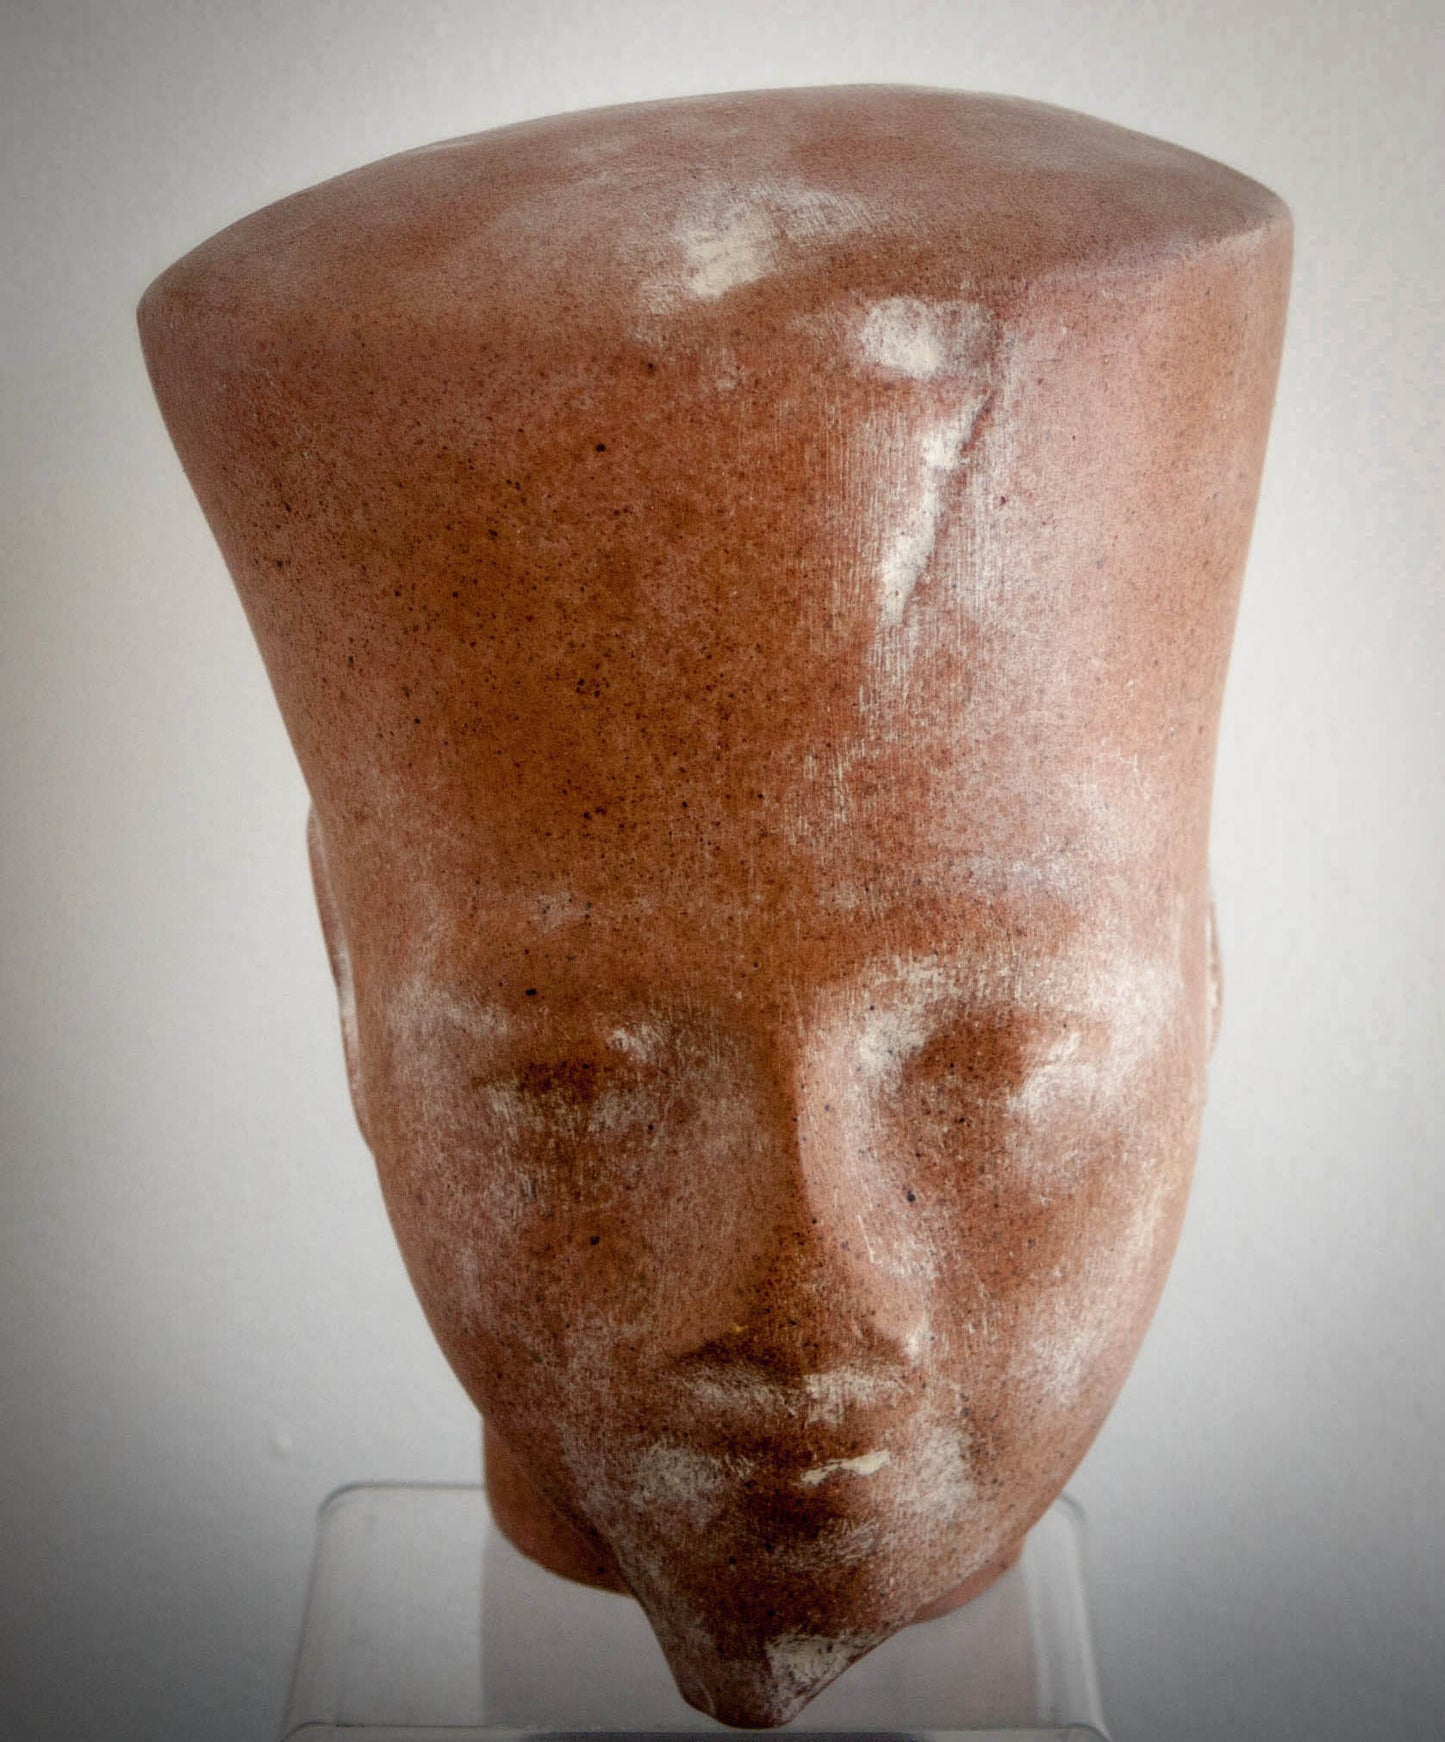 museum-reproduction-king tut as child -head-made-in-egypt-imported-into-australia